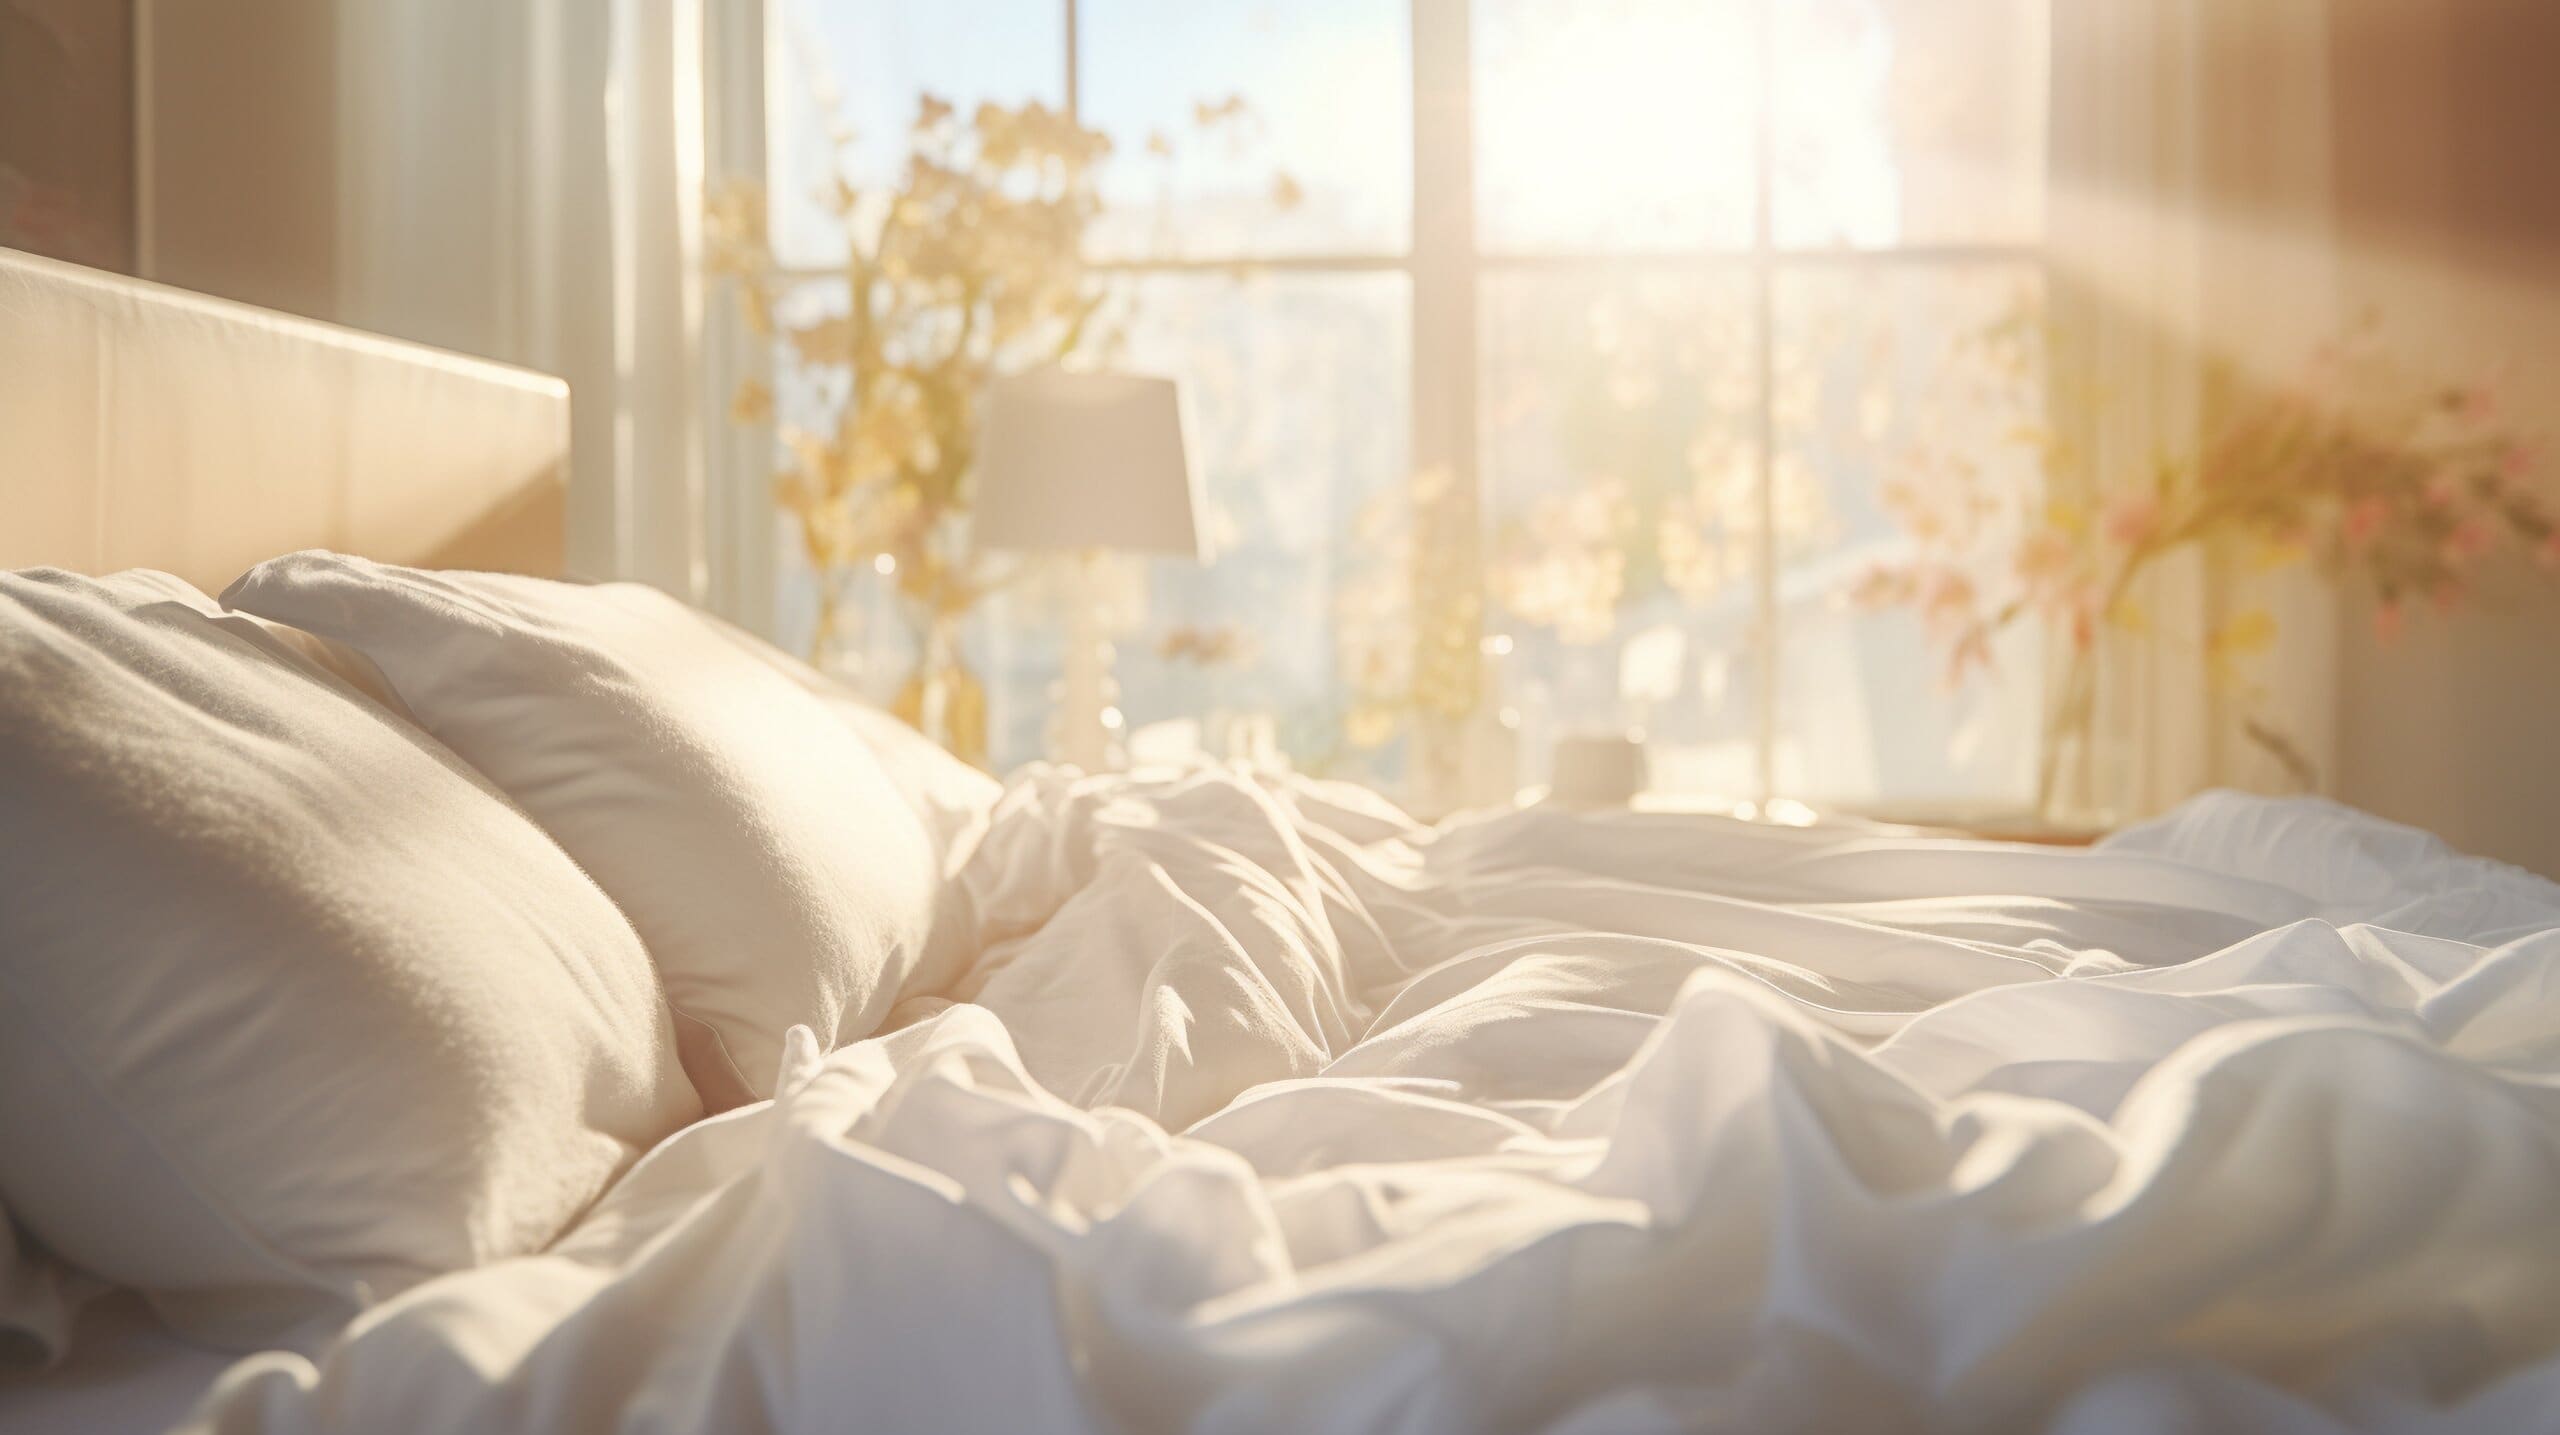 Image of a messy white bed with sunlight coming through a window.